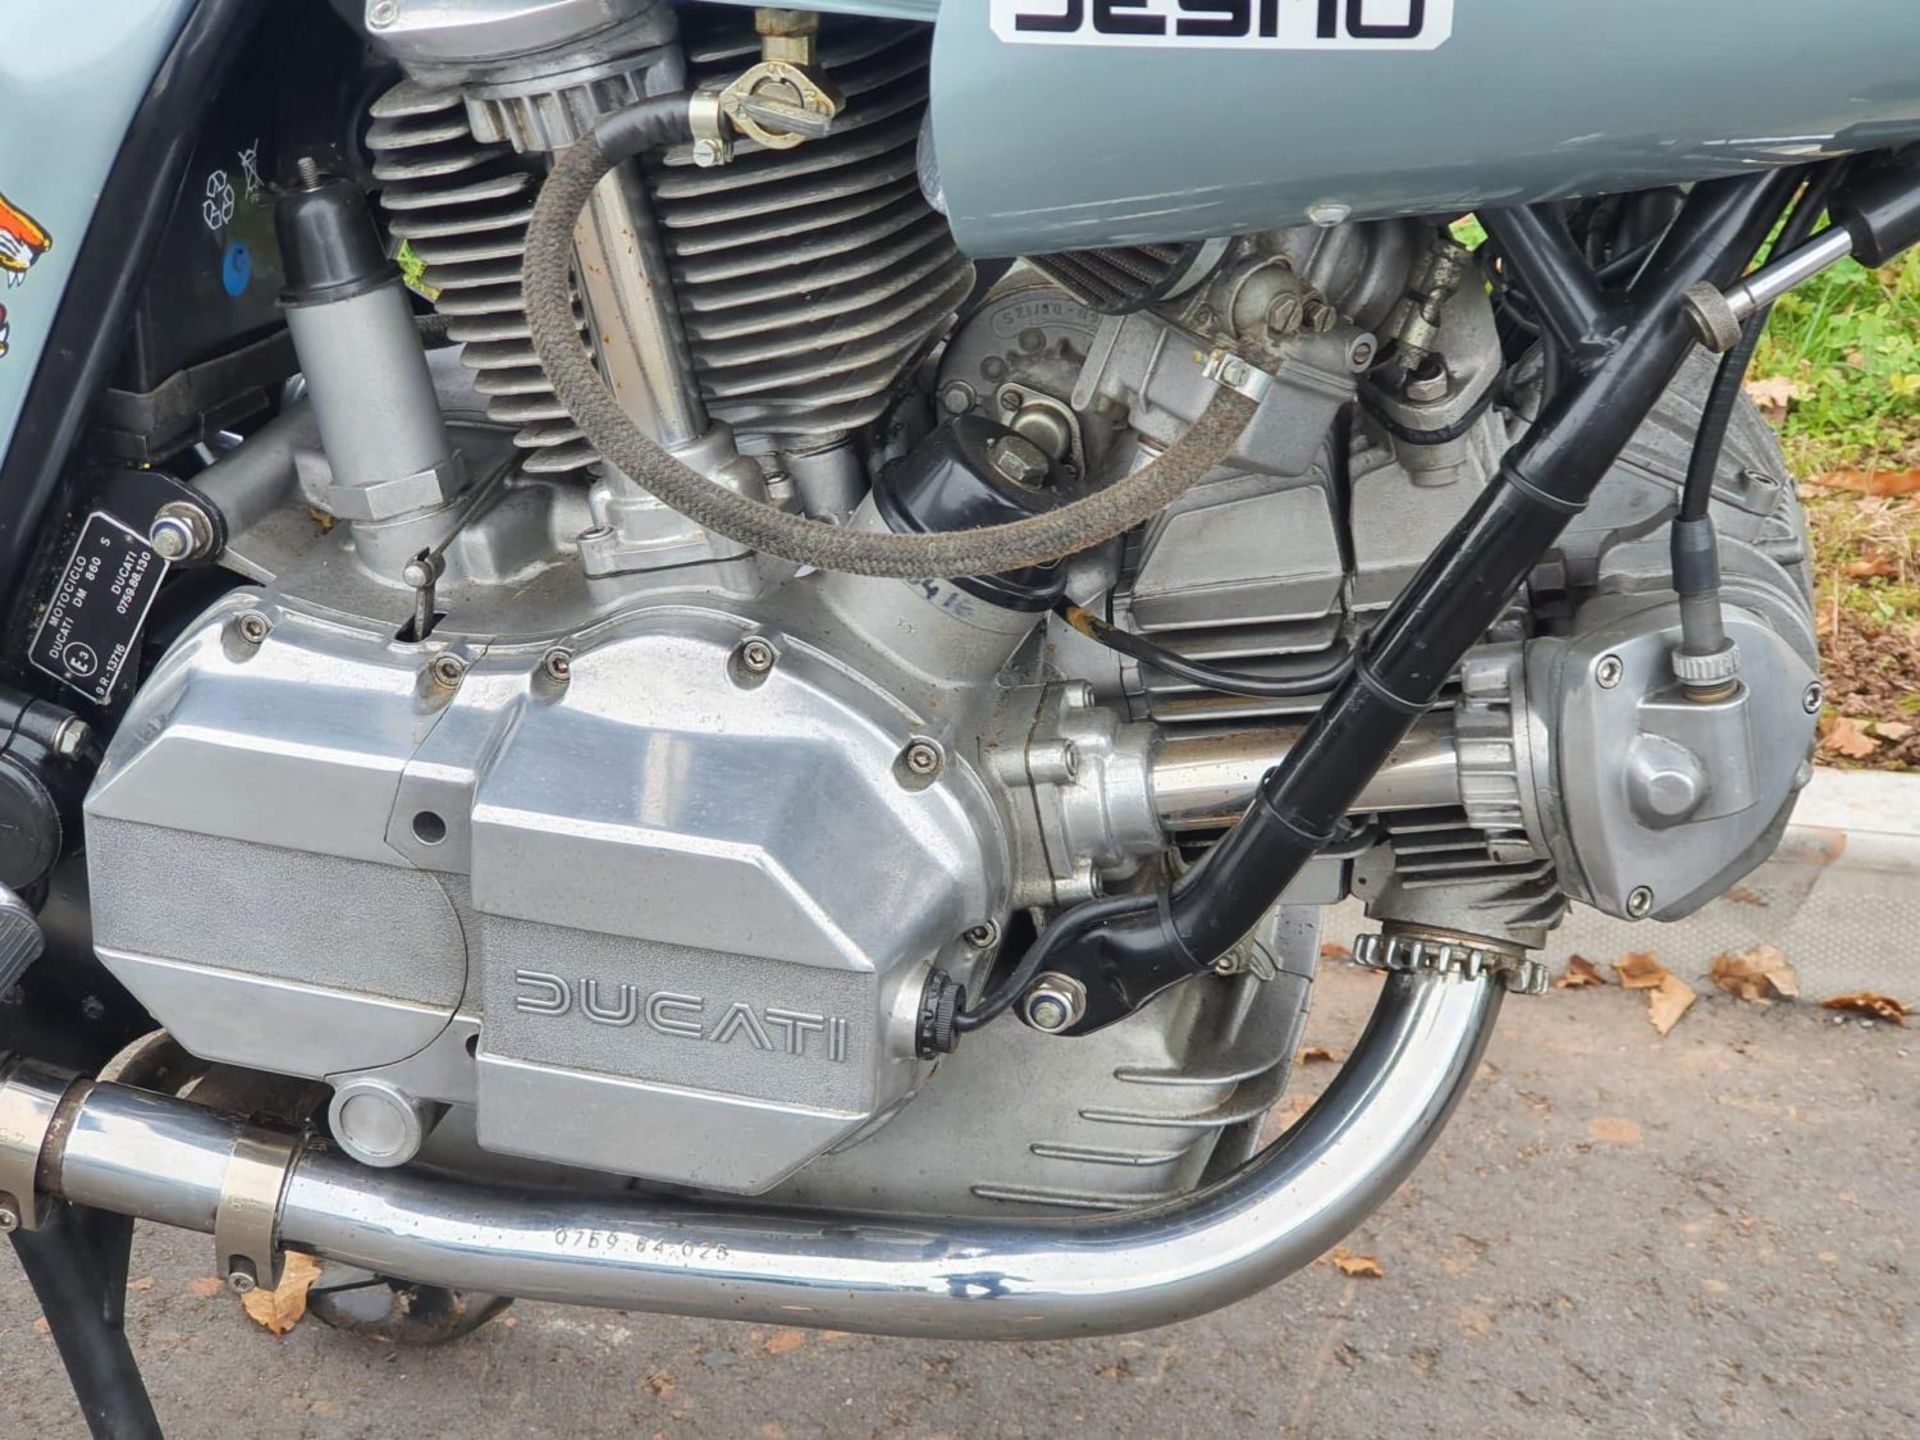 Ducati SS900 motorcycle. 1979. 864cc. Frame no. 903123 Engine no. 903529, please note these - Image 5 of 7